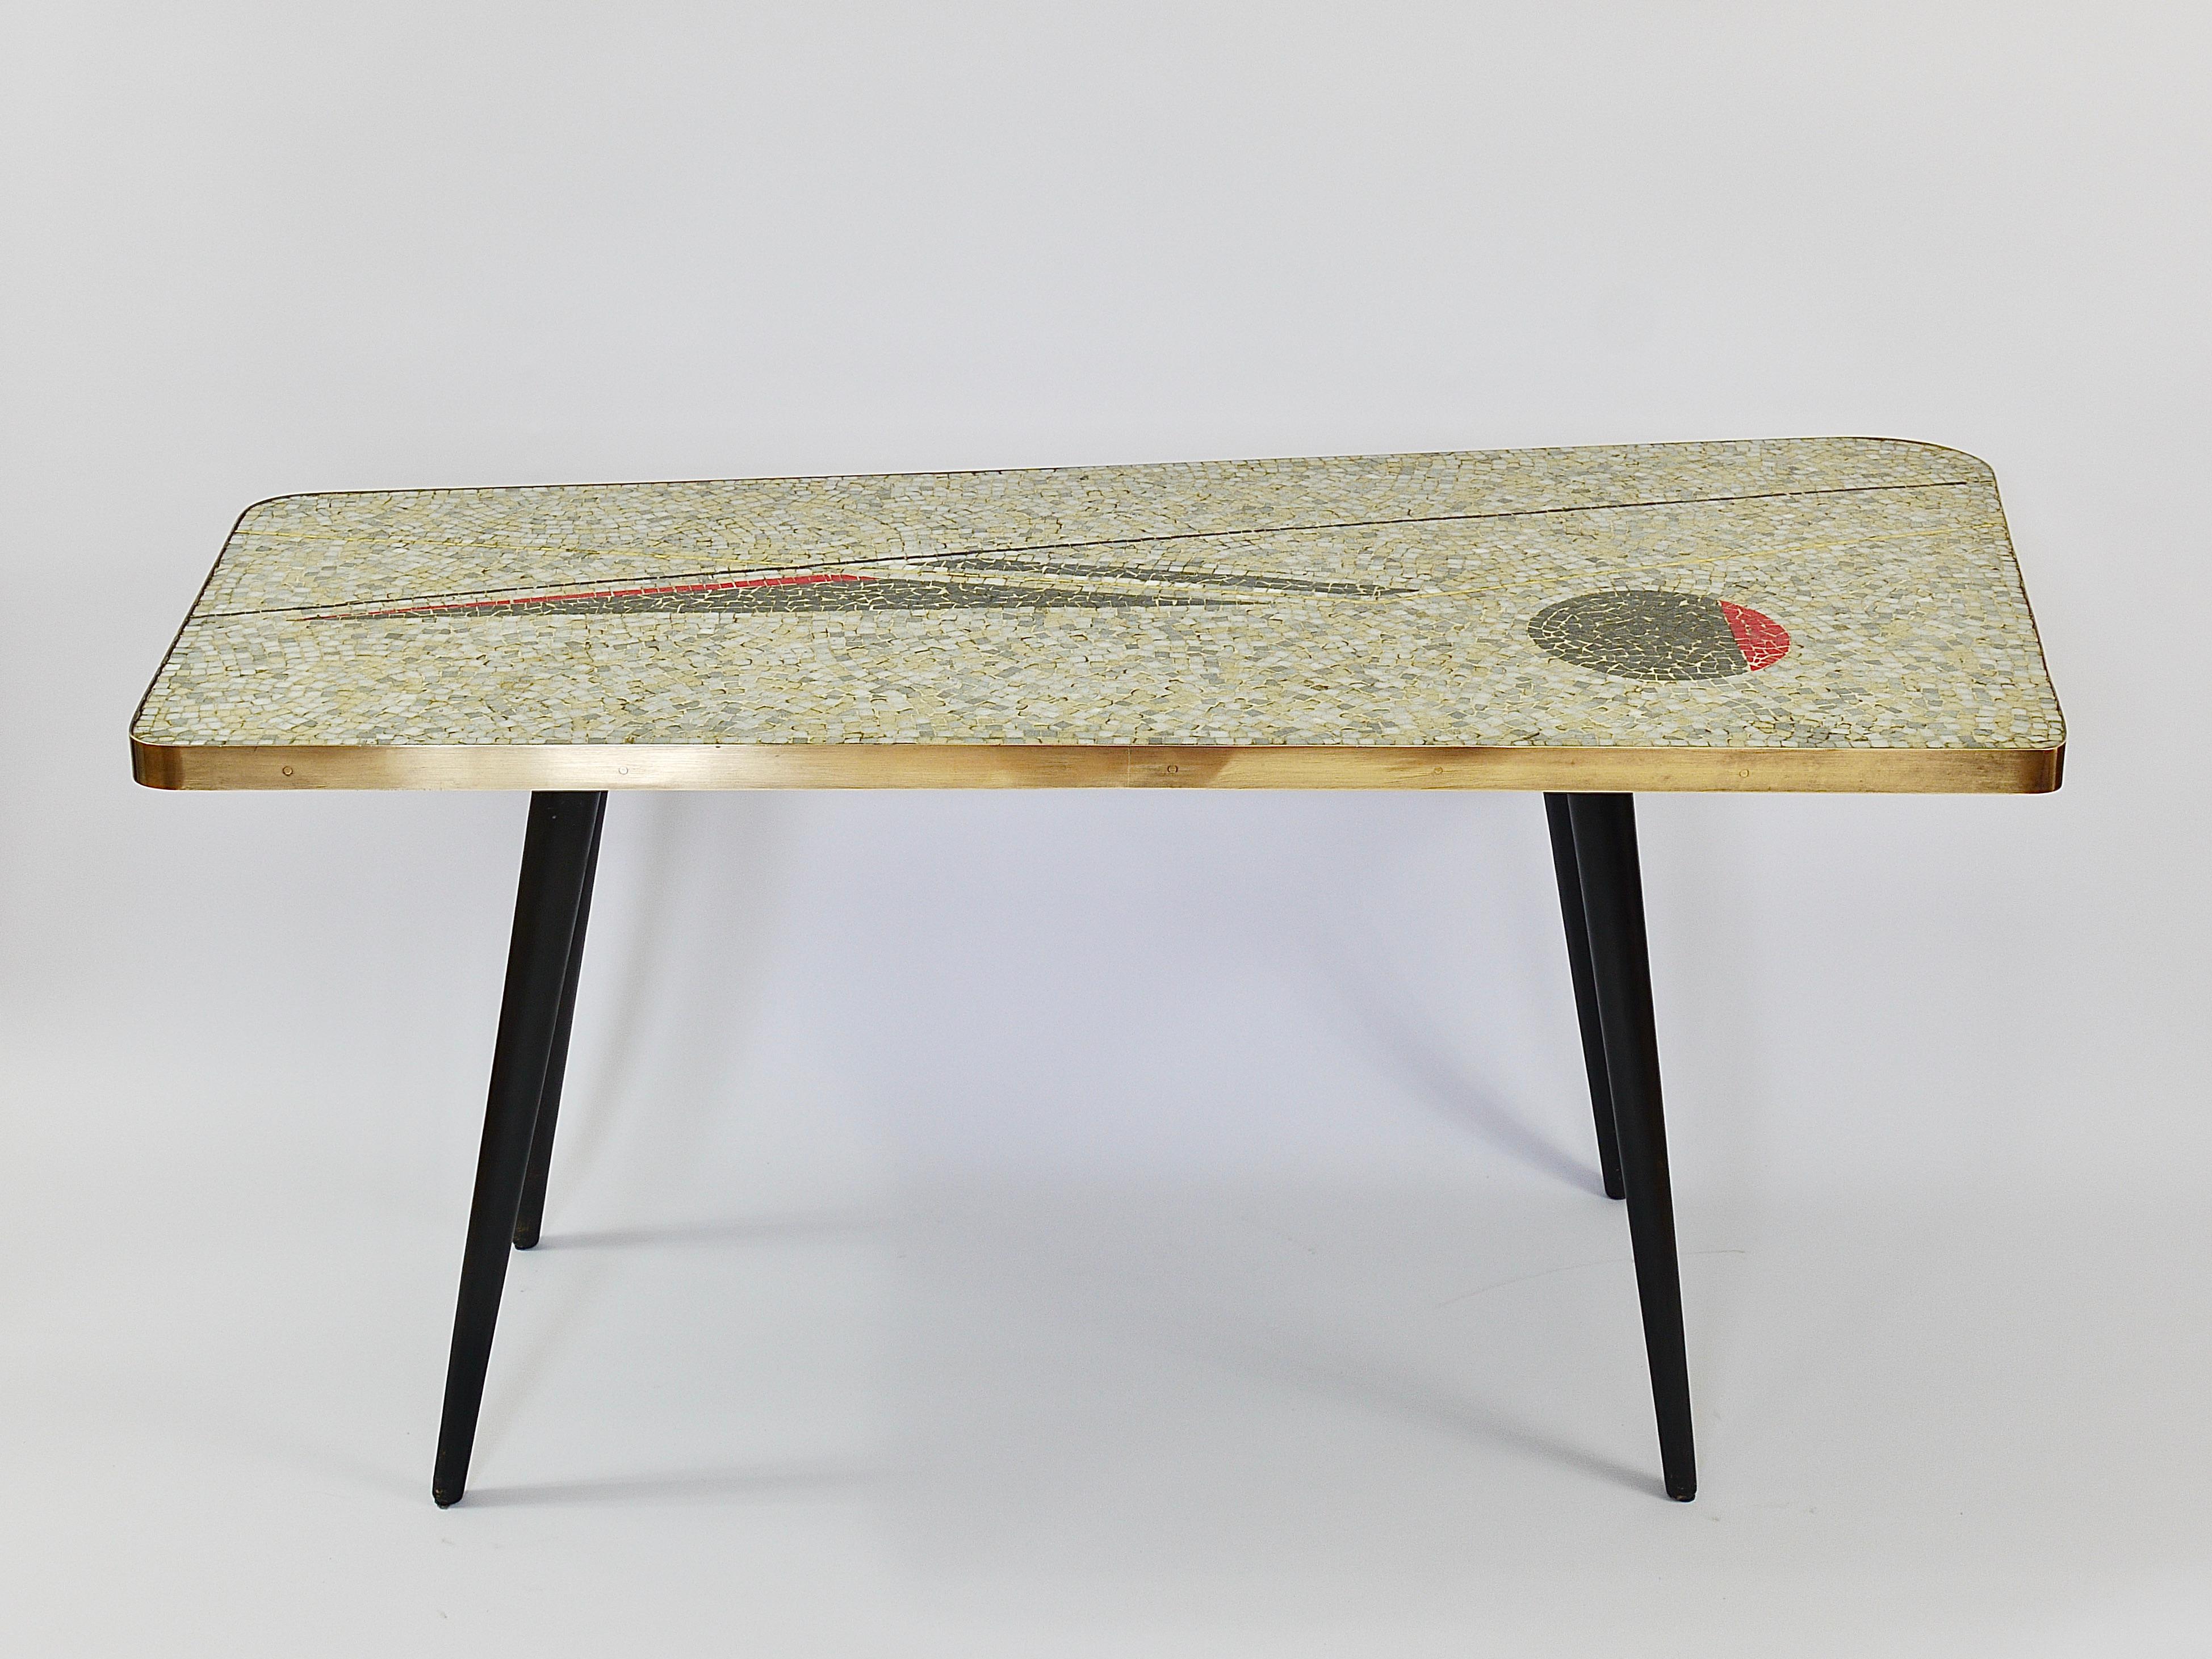 Berthold Muller Asymmetrical Mosaic Tile Coffee or Sofa Table, Germany, 1950s For Sale 11